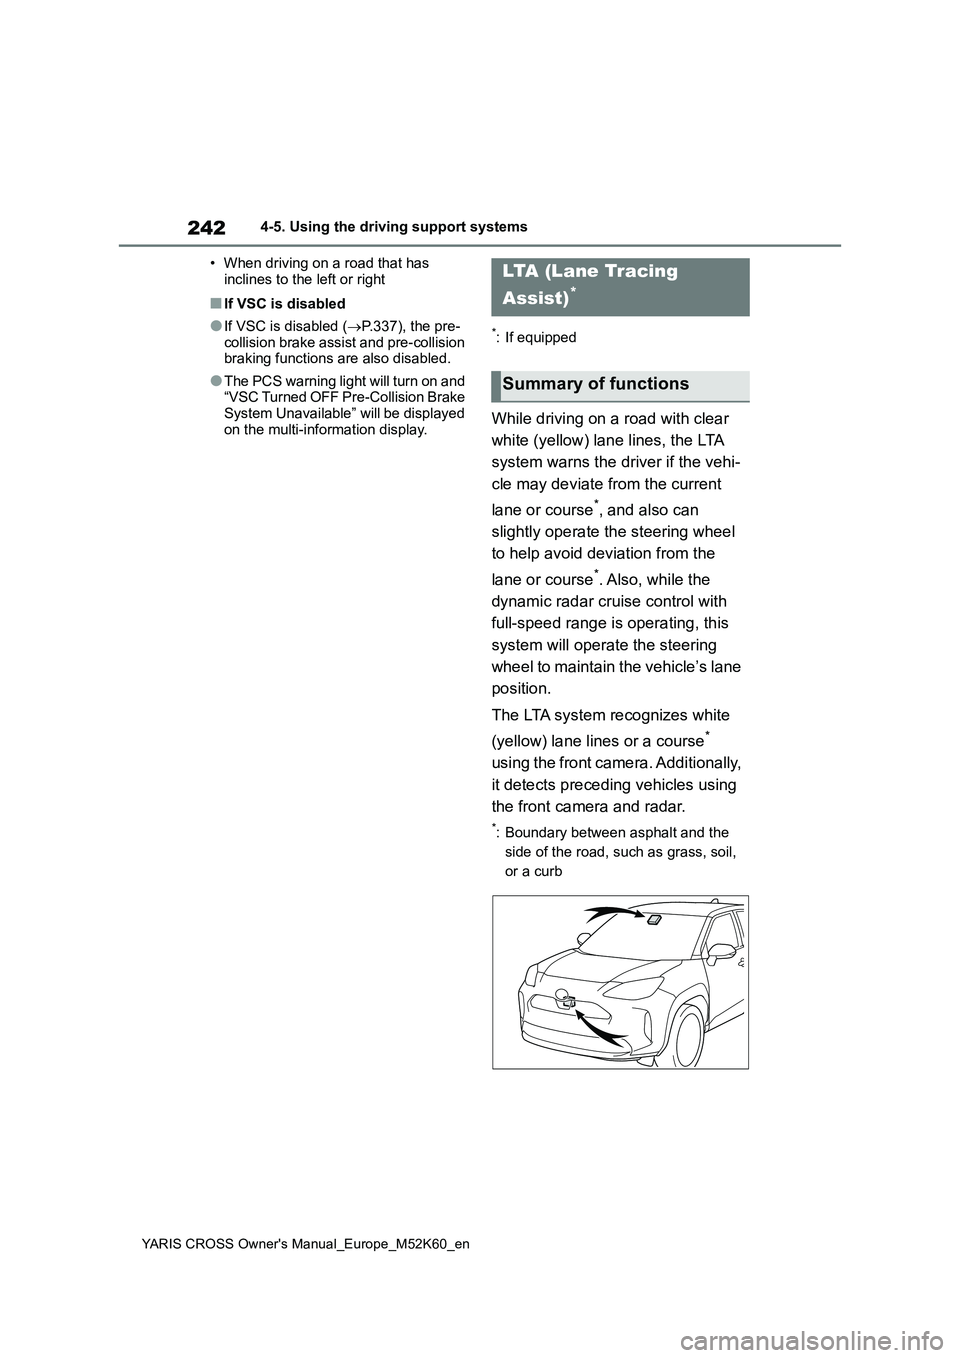 TOYOTA YARIS CROSS 2021  Owners Manual 242
YARIS CROSS Owner's Manual_Europe_M52K60_en
4-5. Using the driving support systems 
• When driving on a road that has  
inclines to the left or right
■If VSC is disabled
●If VSC is disab